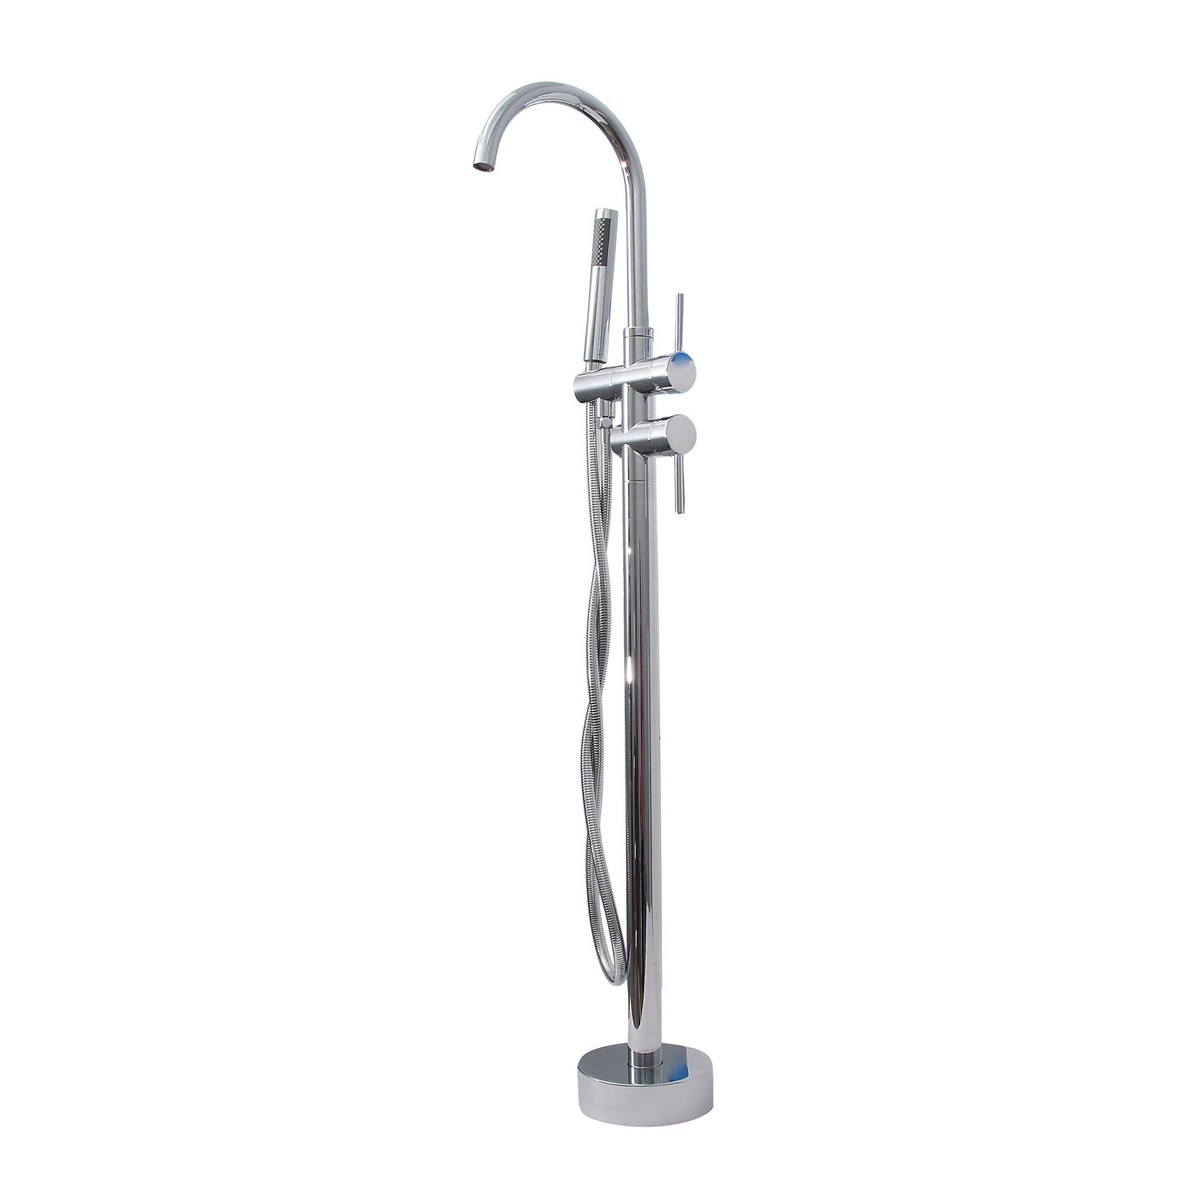 BARCLAY 7964 ELORA 46 1/8 INCH SINGLE HOLE FREESTANDING TUB FILLER WITH HAND SHOWER